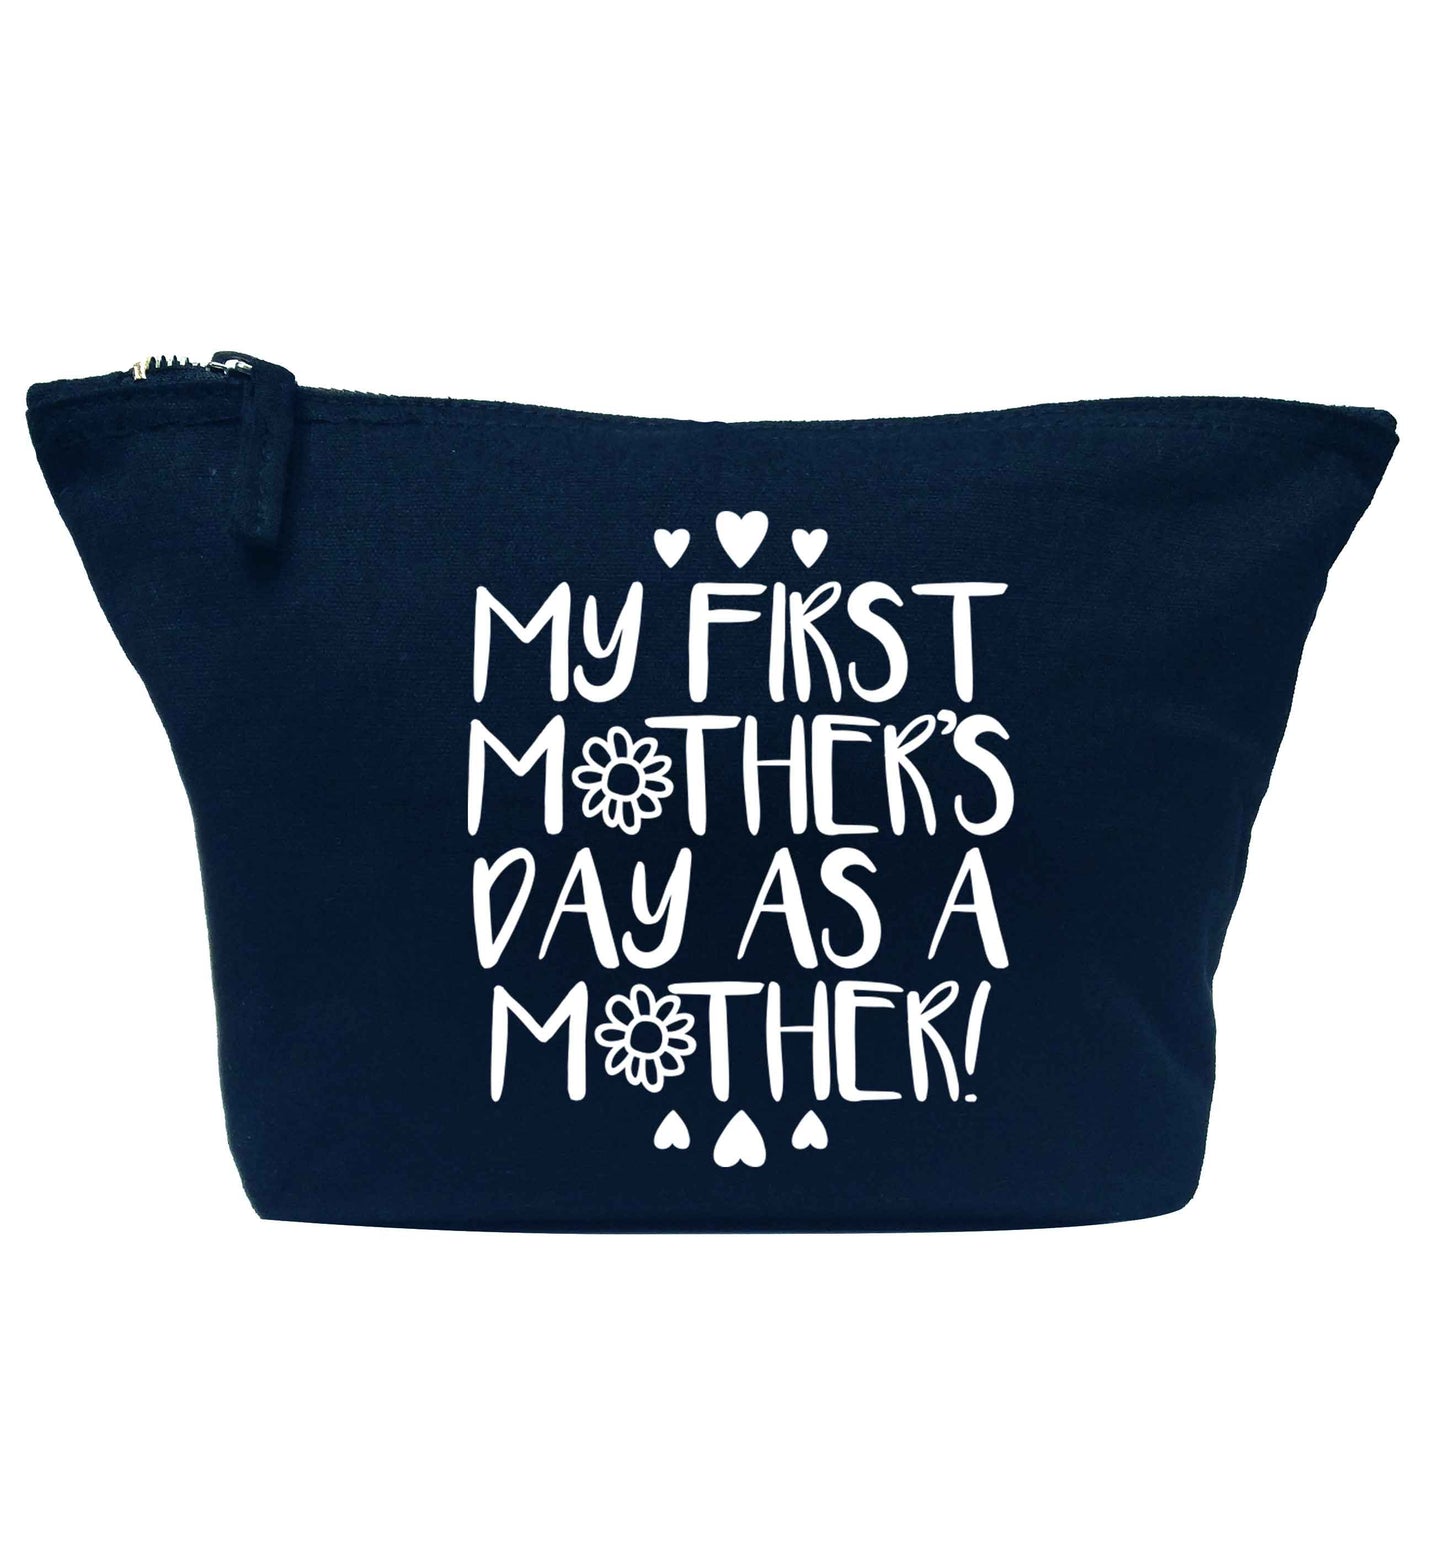 It's my first mother's day as a mother navy makeup bag